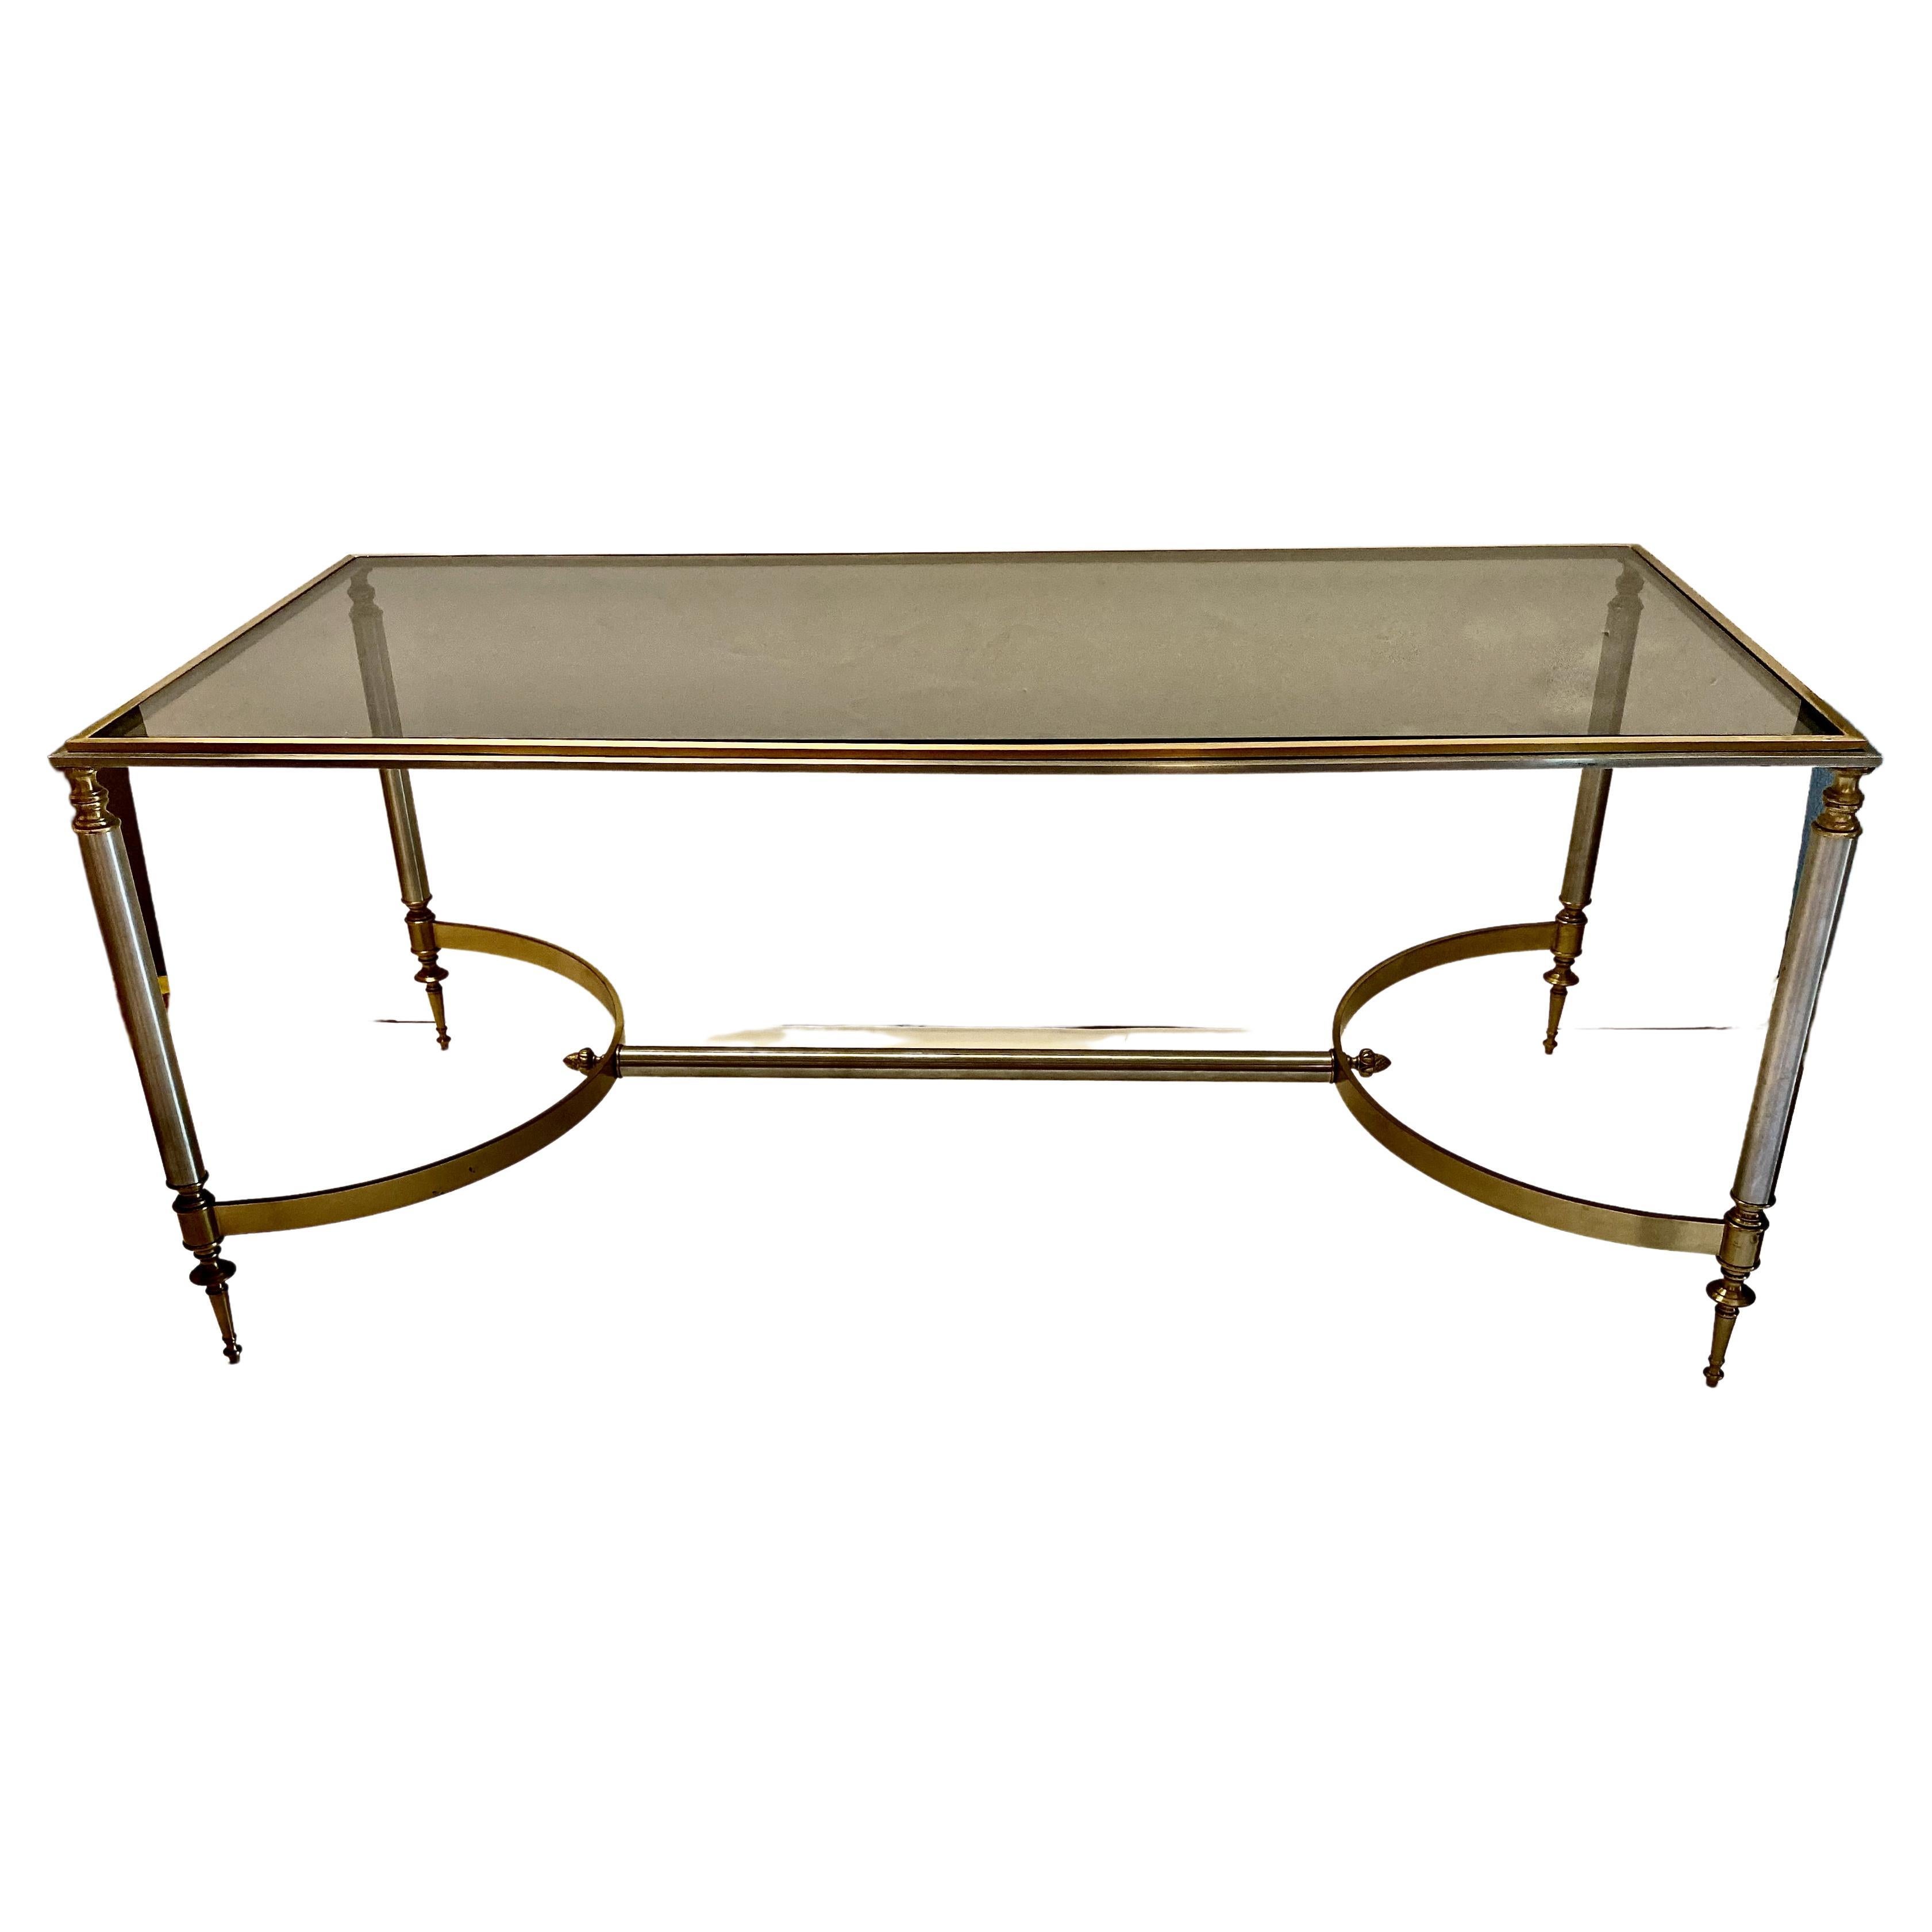 This is a charming and super chic French Brass & Steel coffee table that is attributed to Jansen. The table is in overall very good condition with just traces of anticipated original patina. The raised applied brass detailing to the steel top, in